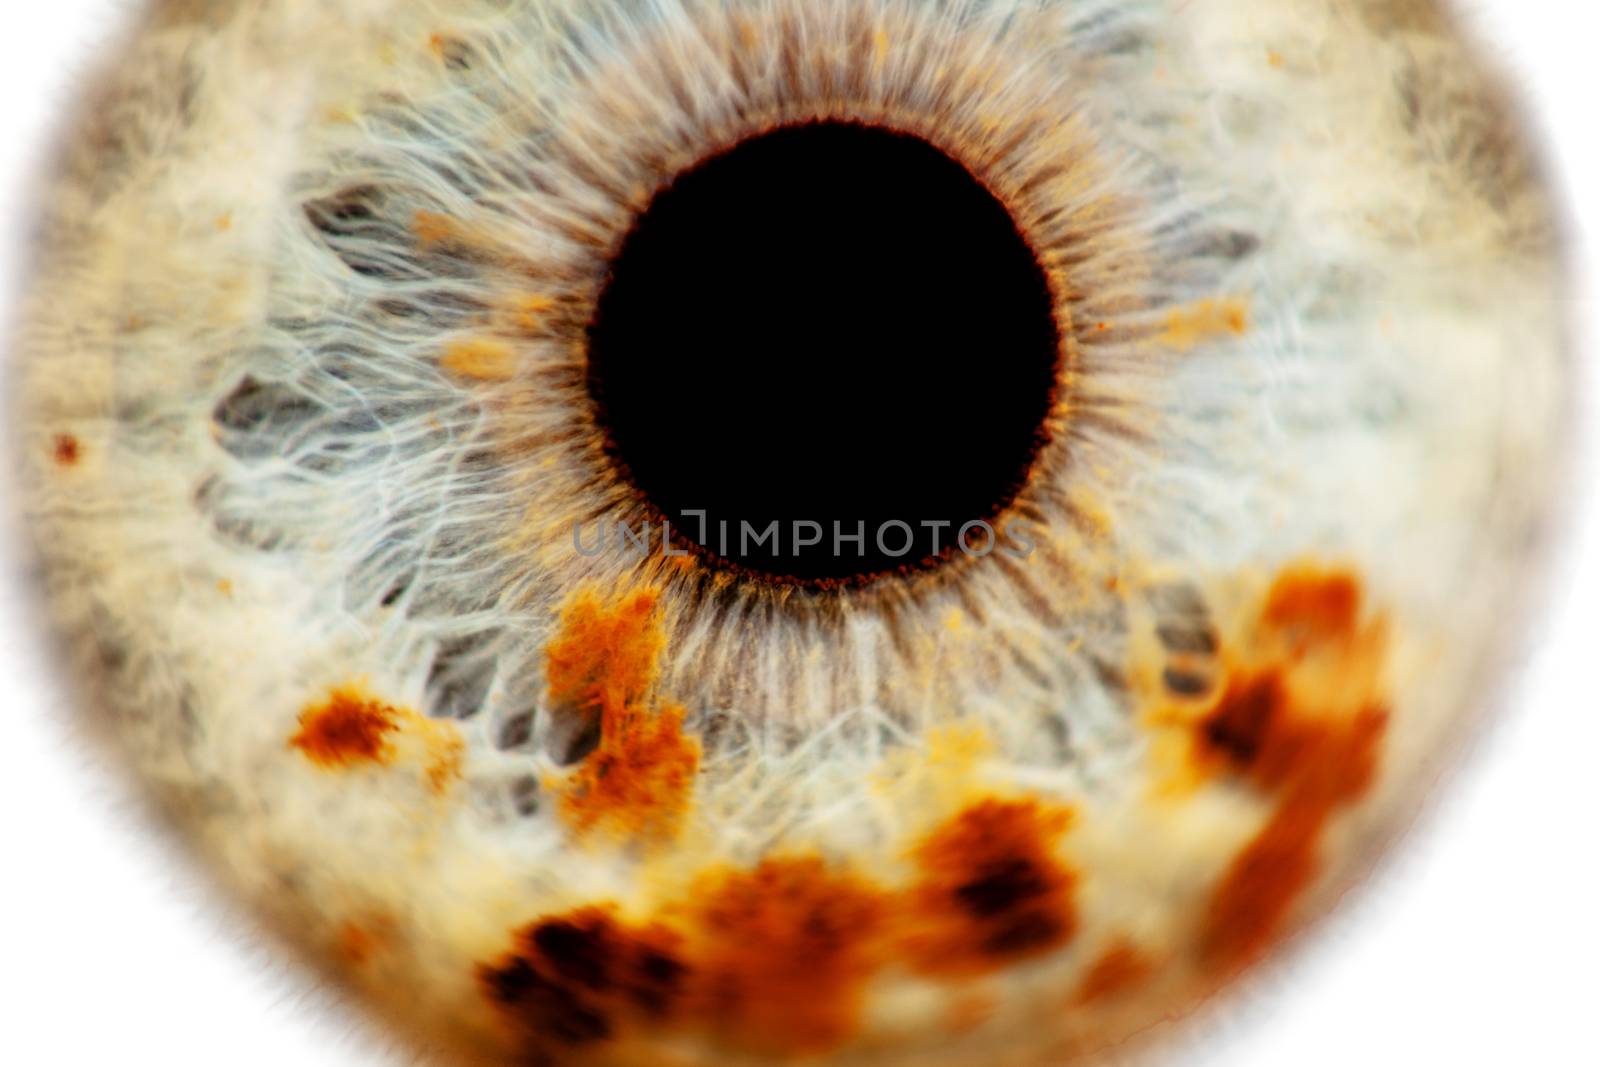 extreme close up of a human eye with reddish dots, shallow depth of field